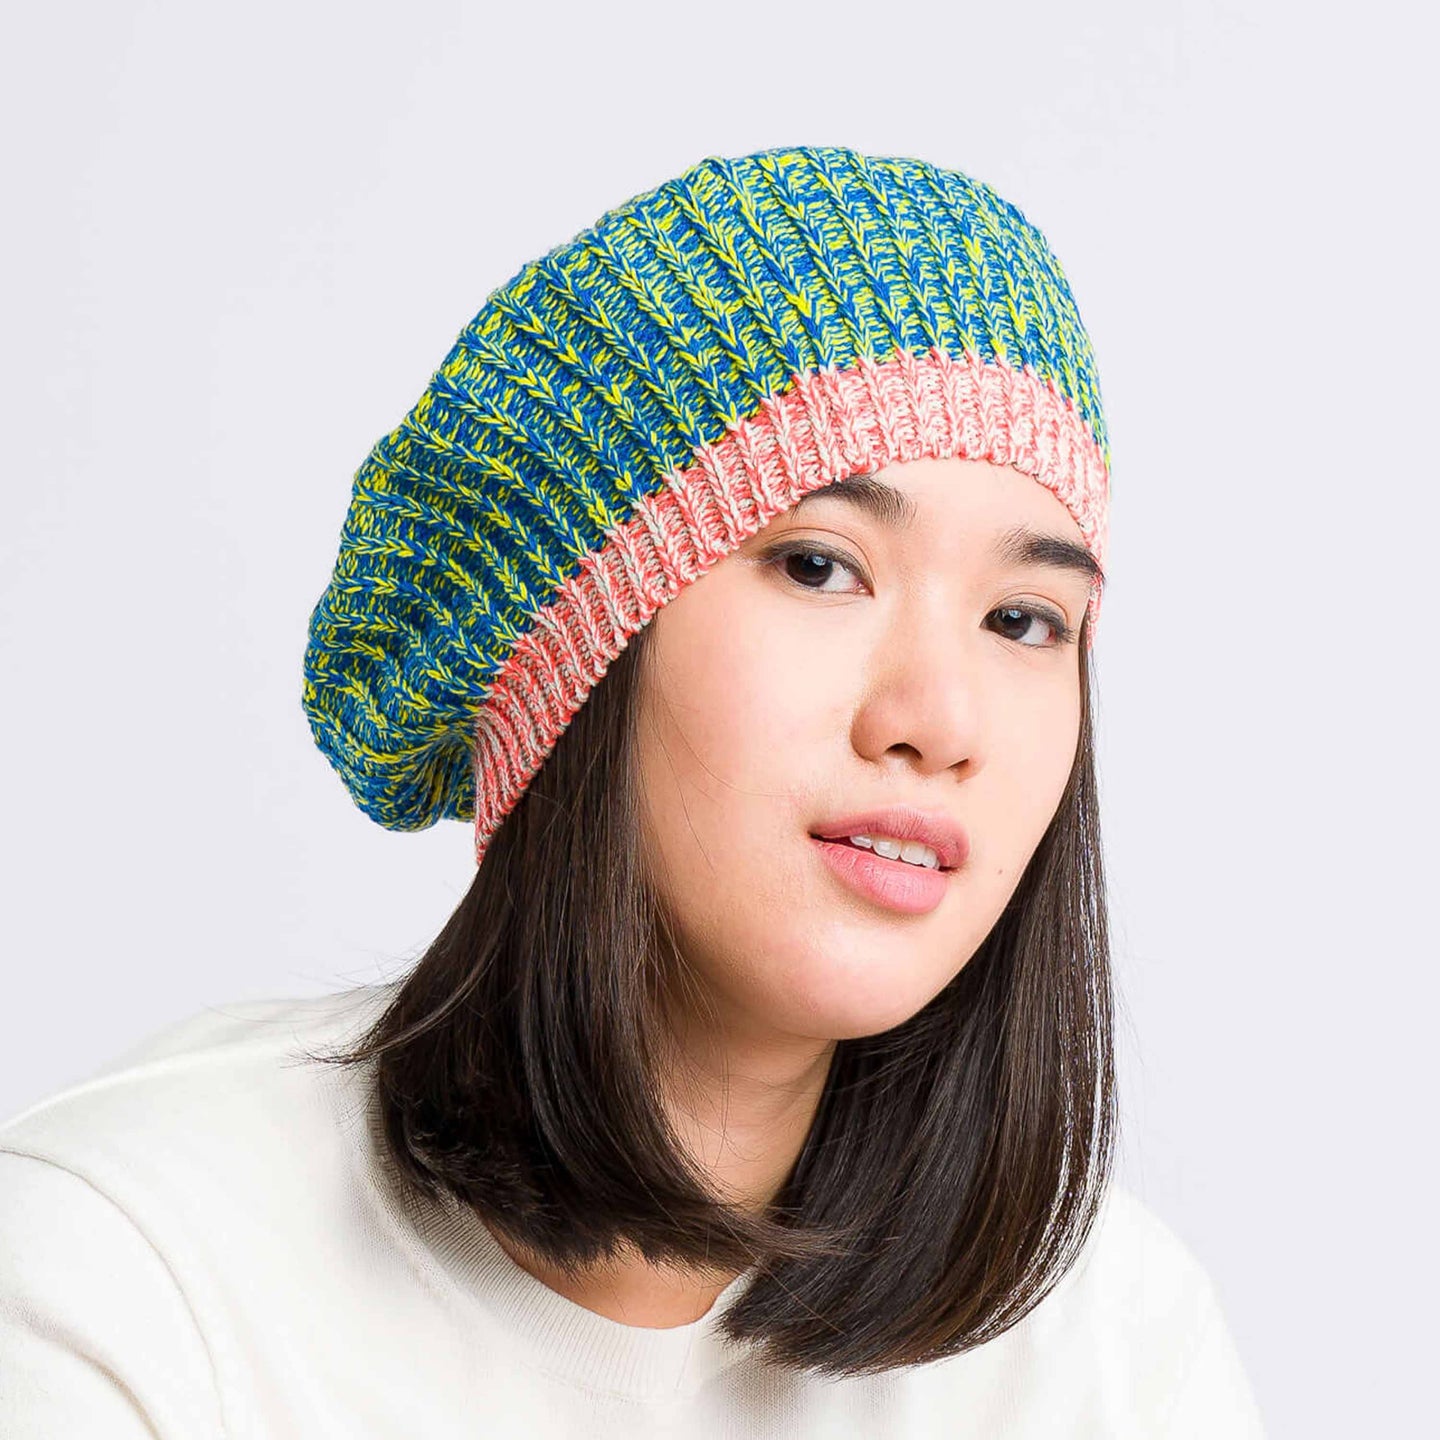 Static Swatch Knit Marl Beret On Model